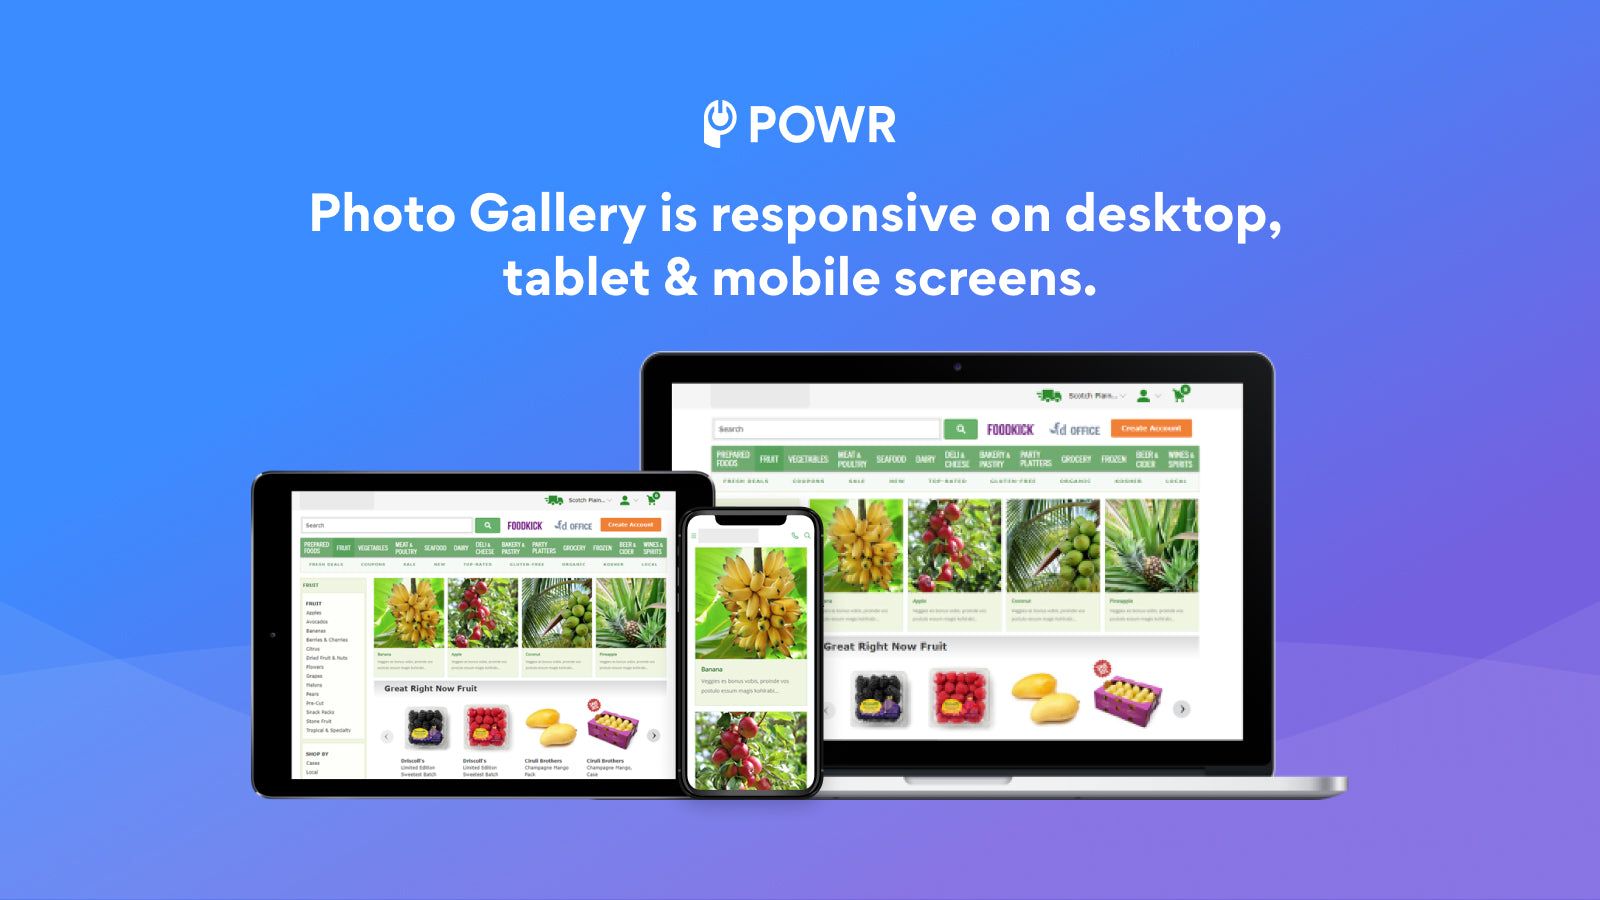 Photo galleries are responsive on desktop, tablet & mobile.